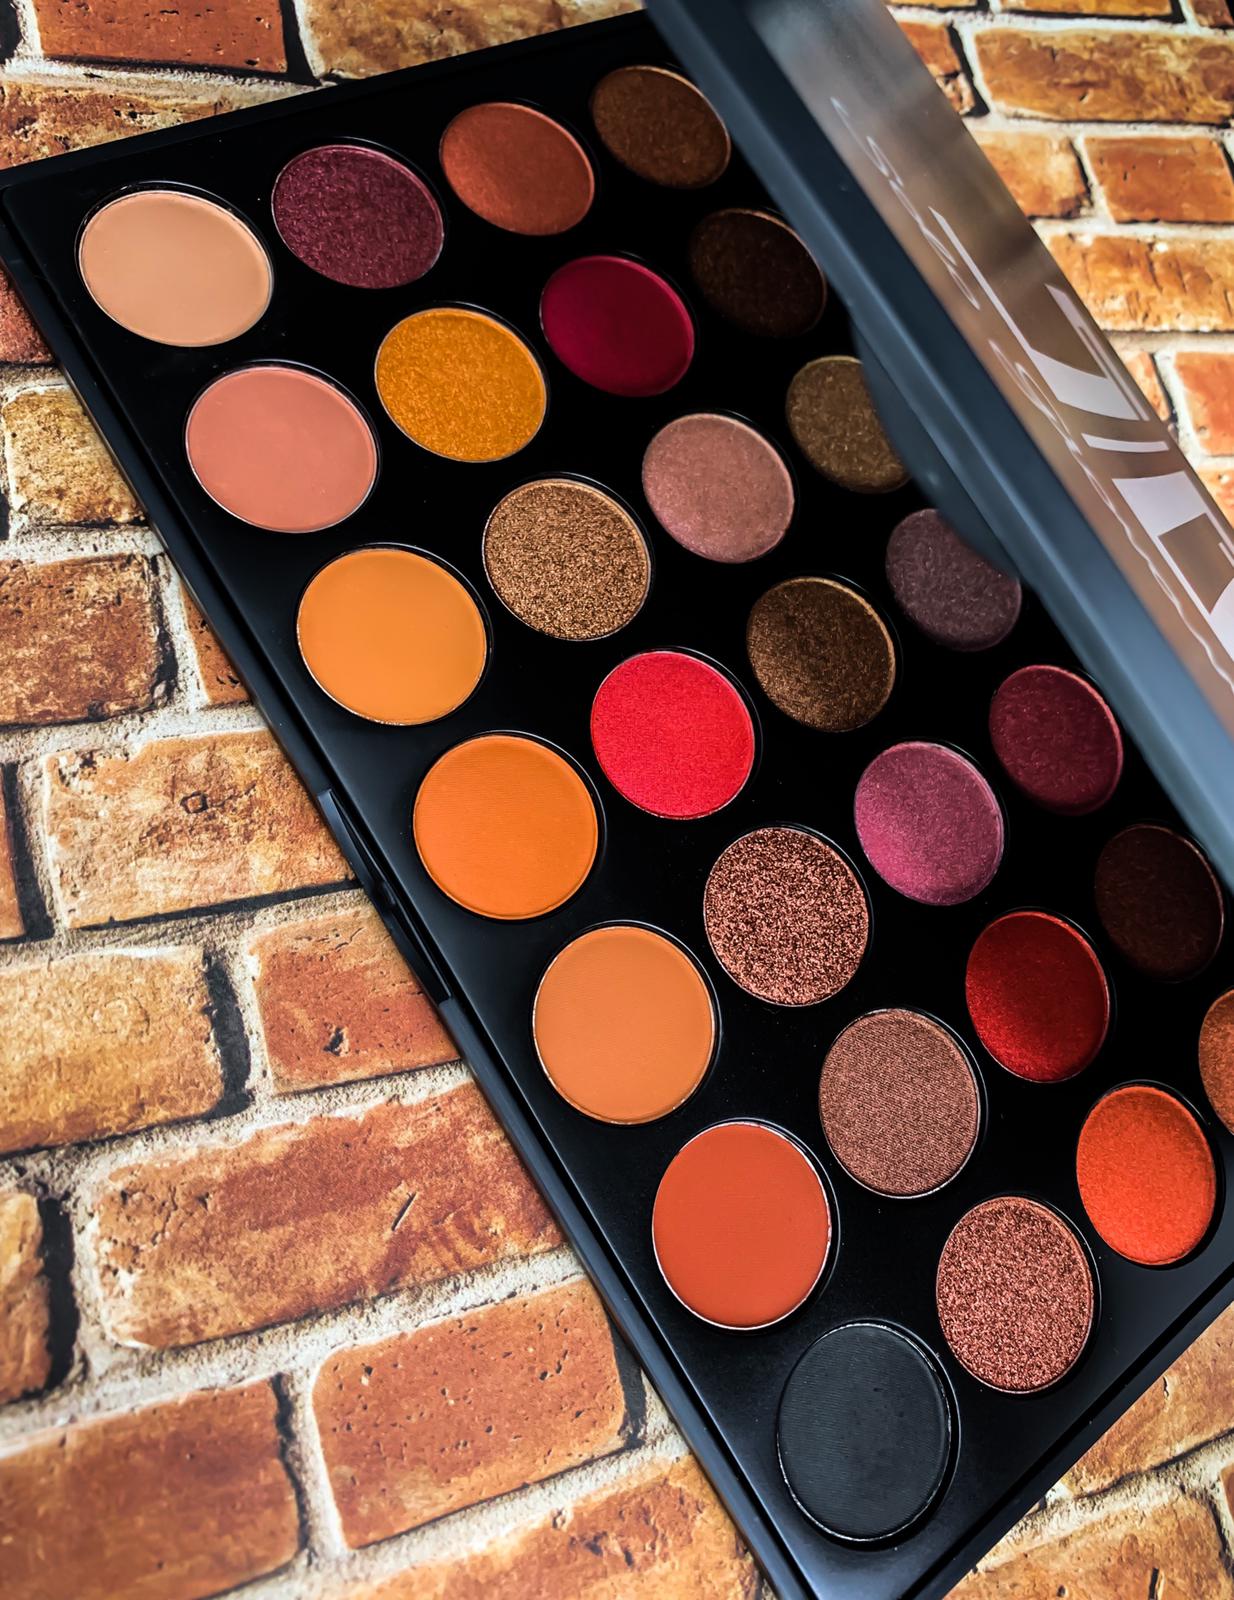 Allure By Nature High Pigment Eyeshadow Palette